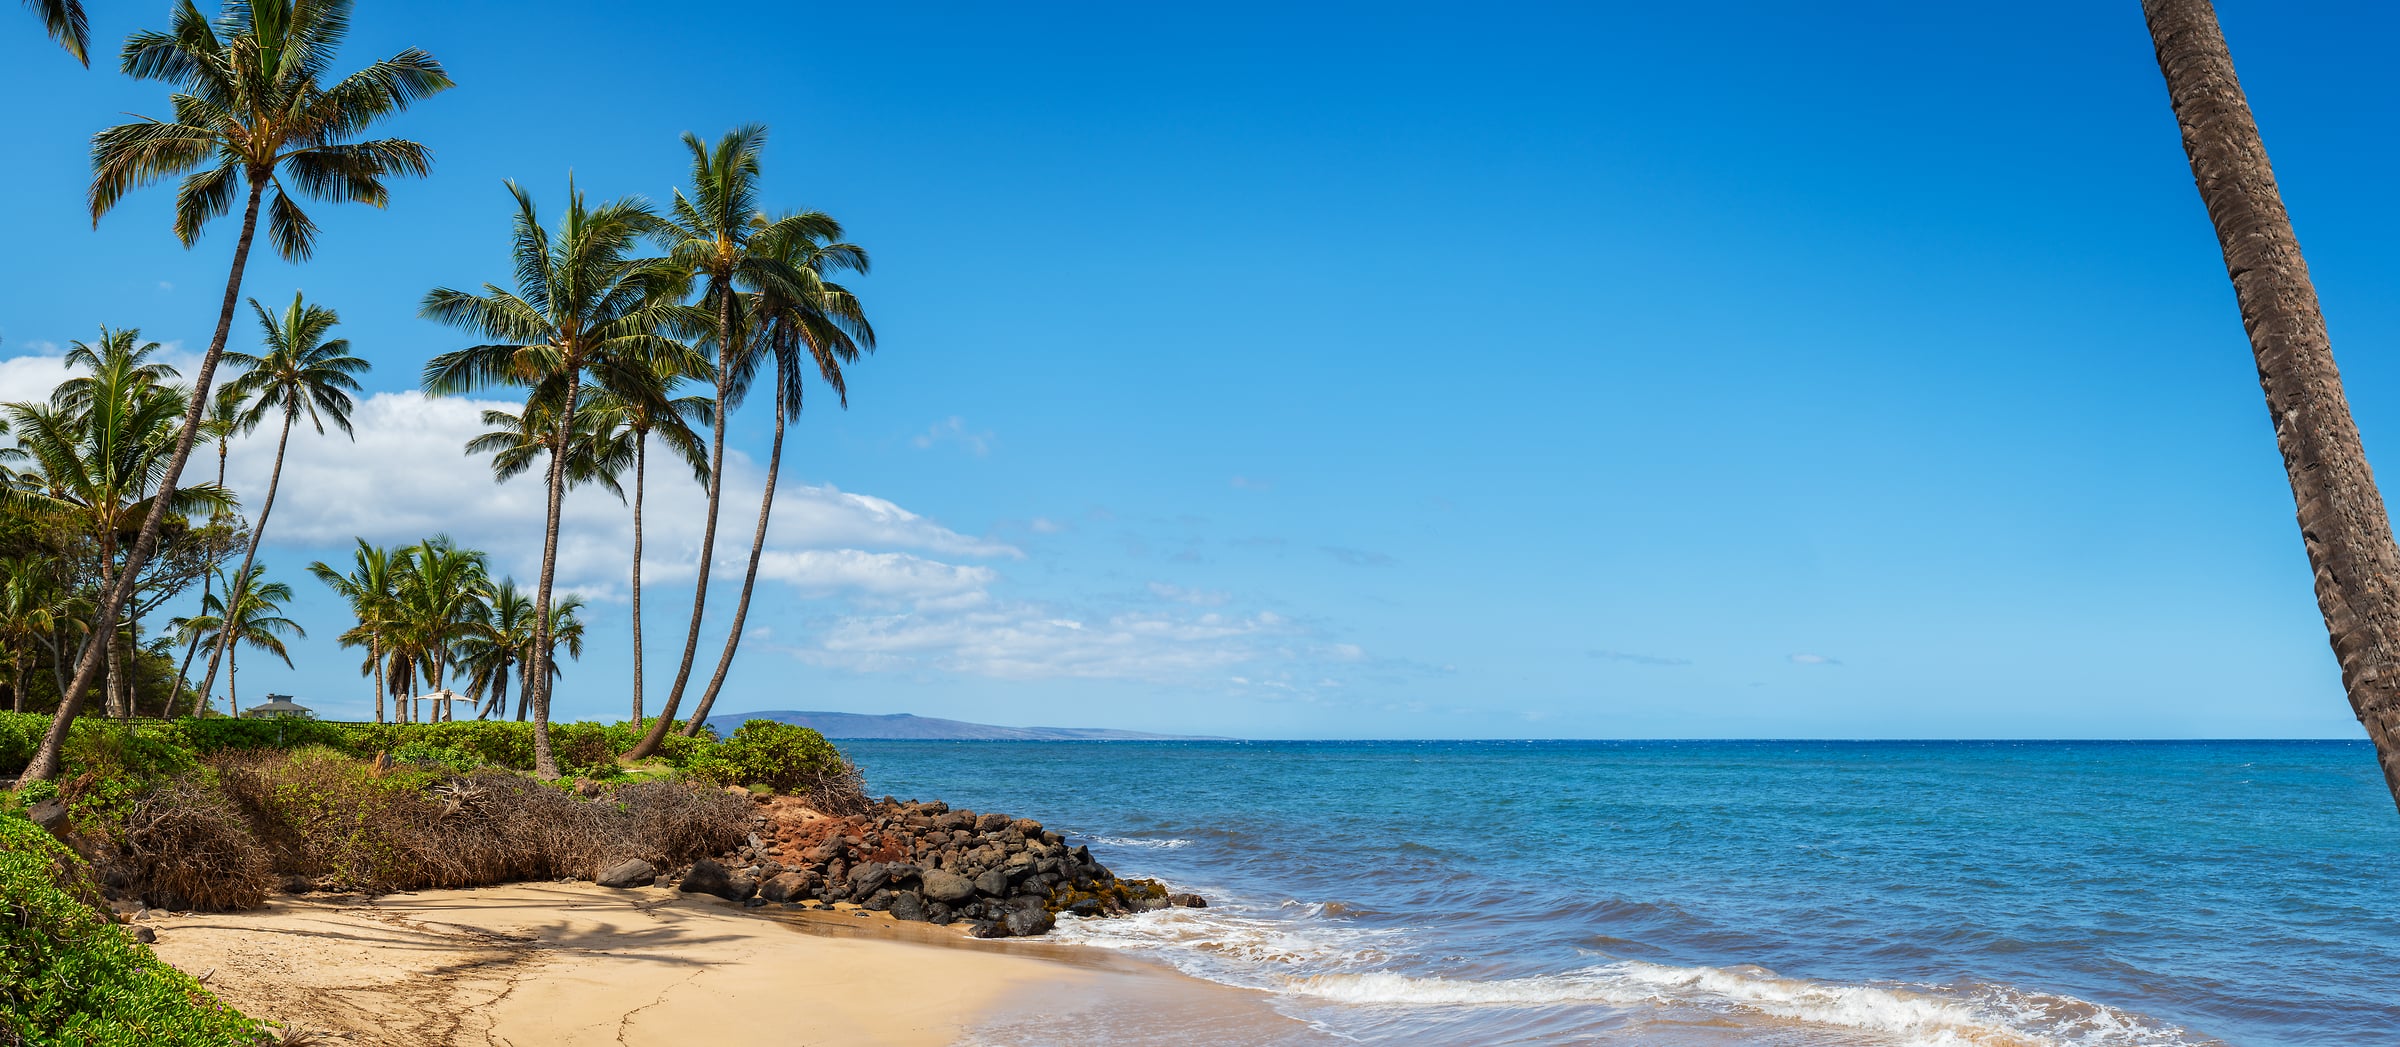 481 megapixels! A very high resolution, large-format VAST photo print of a tropical beach in Hawaii with palm trees and the Pacific Ocean; beach photograph created by Jim Tarpo in Kihei, Maui, Hawaii.